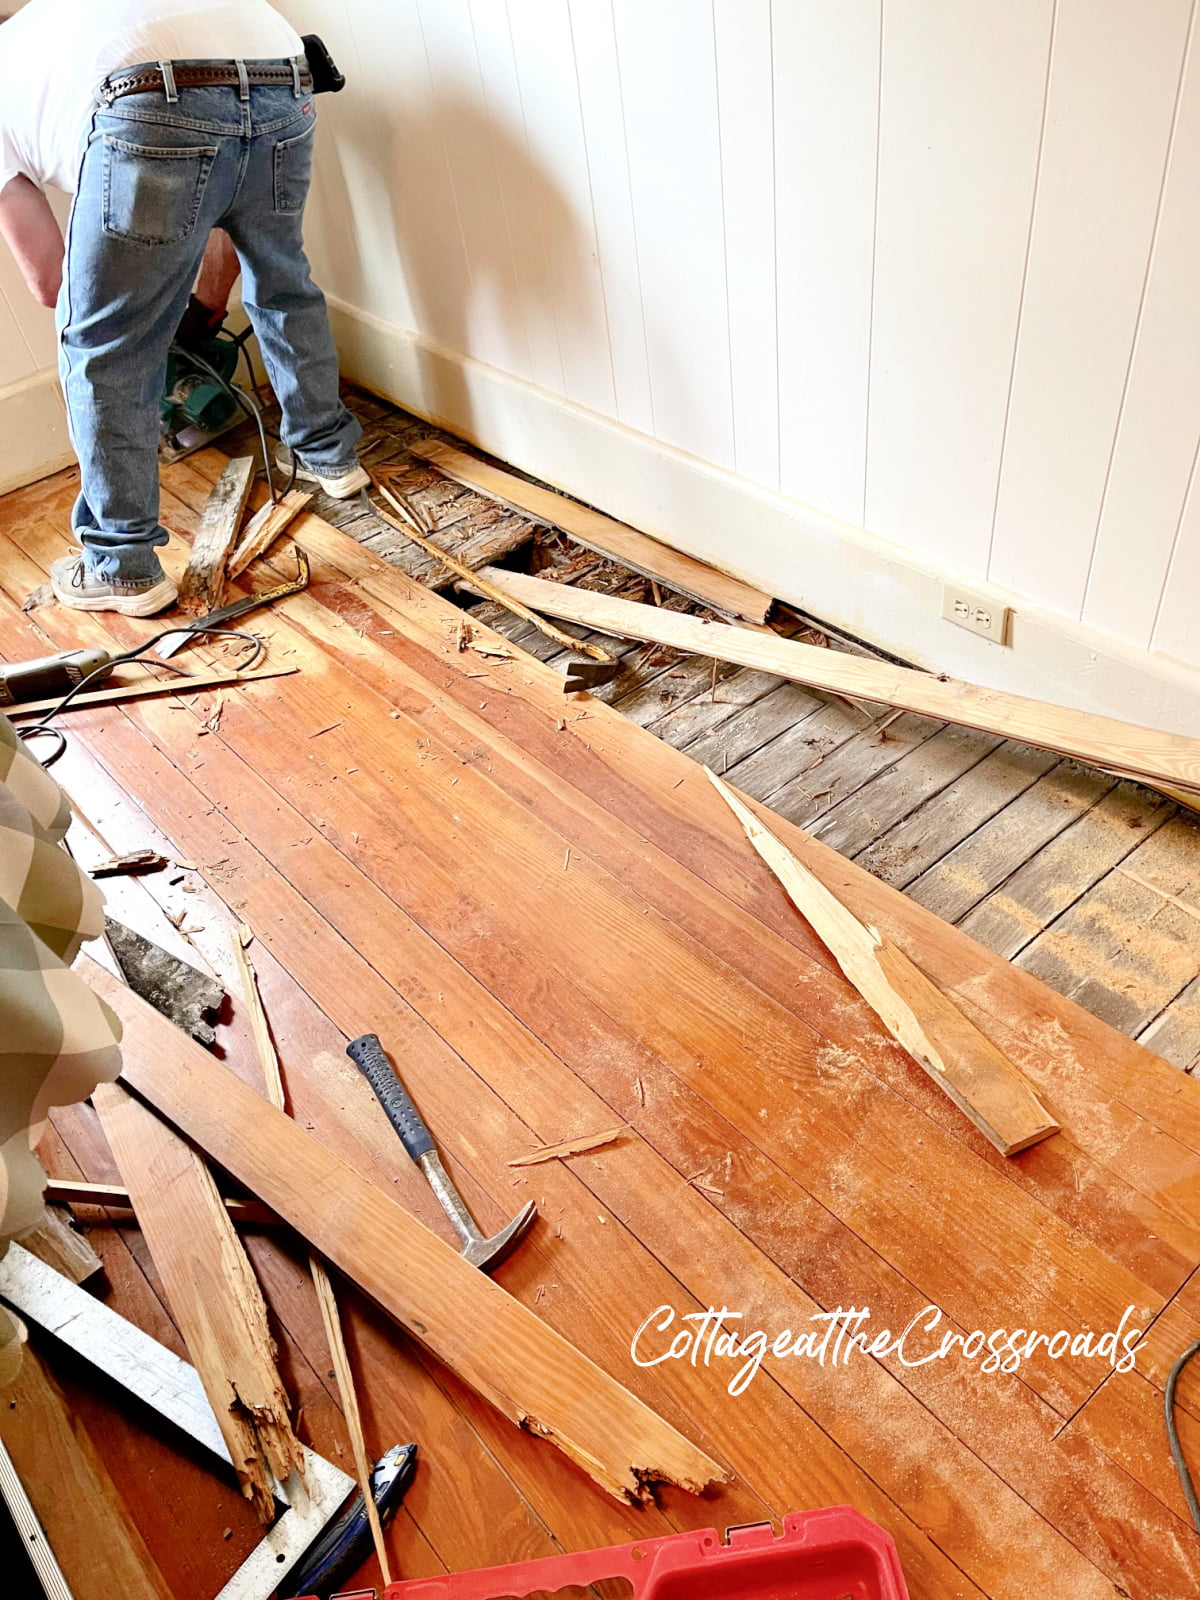 Removing rotten wood in the dining room